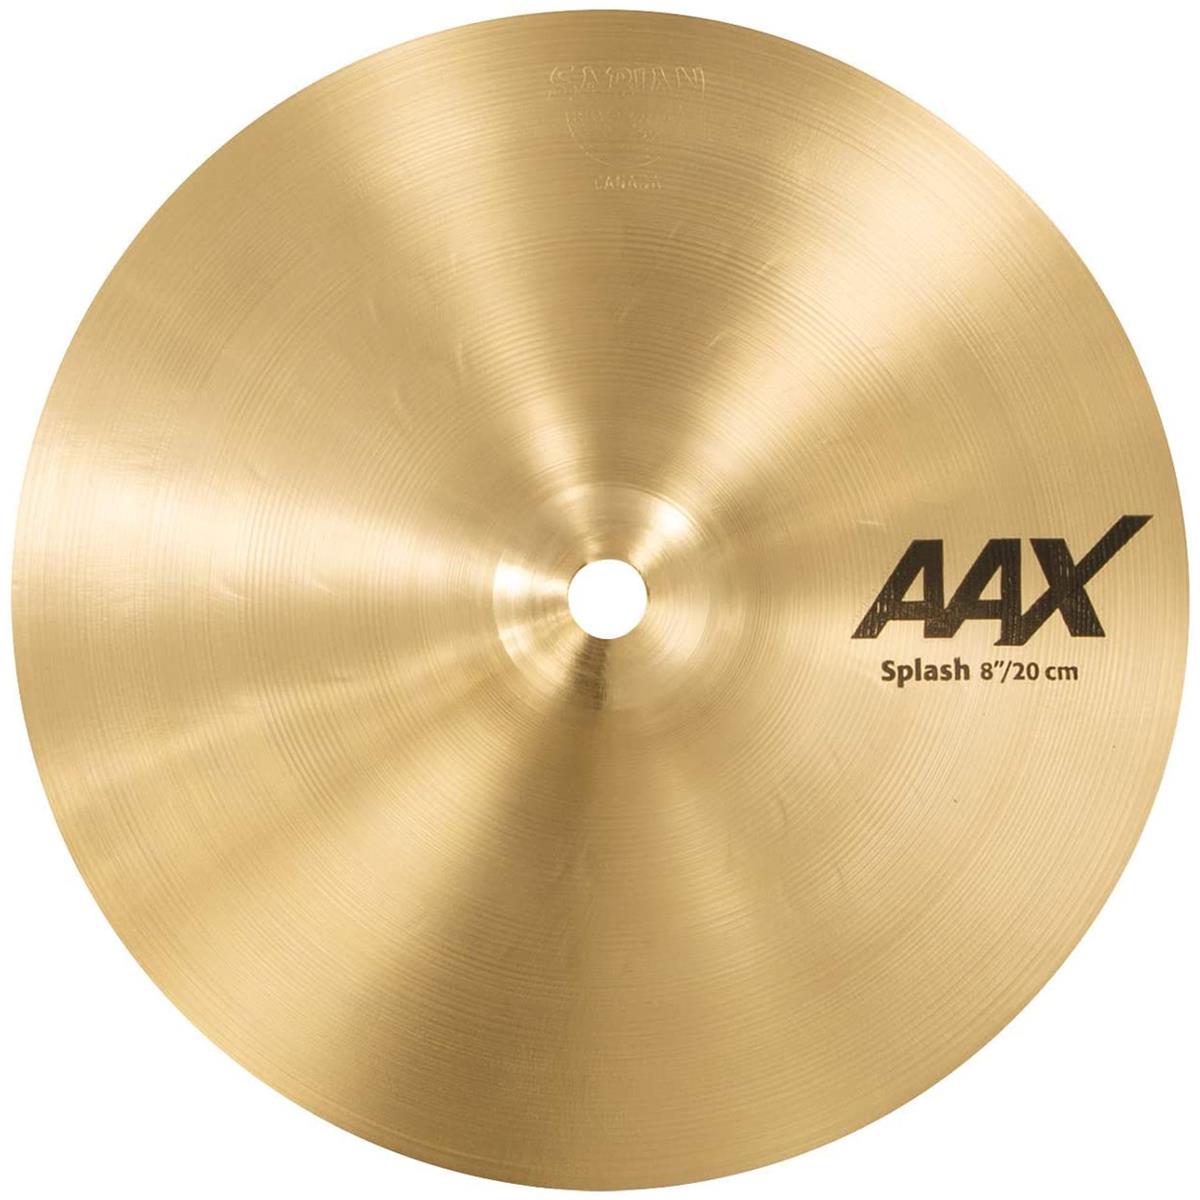 Sabian 8" AAX Splash Cymbal, Extra-Thin, Natural Finish Extremely fast and very bright, the SABIAN 8" AAX Splash provides plenty of penetrating cut. The SABIAN AAX series delivers consistently bright, crisp, clear and cutting responses - AAX is the ultimate Modern Bright sound!